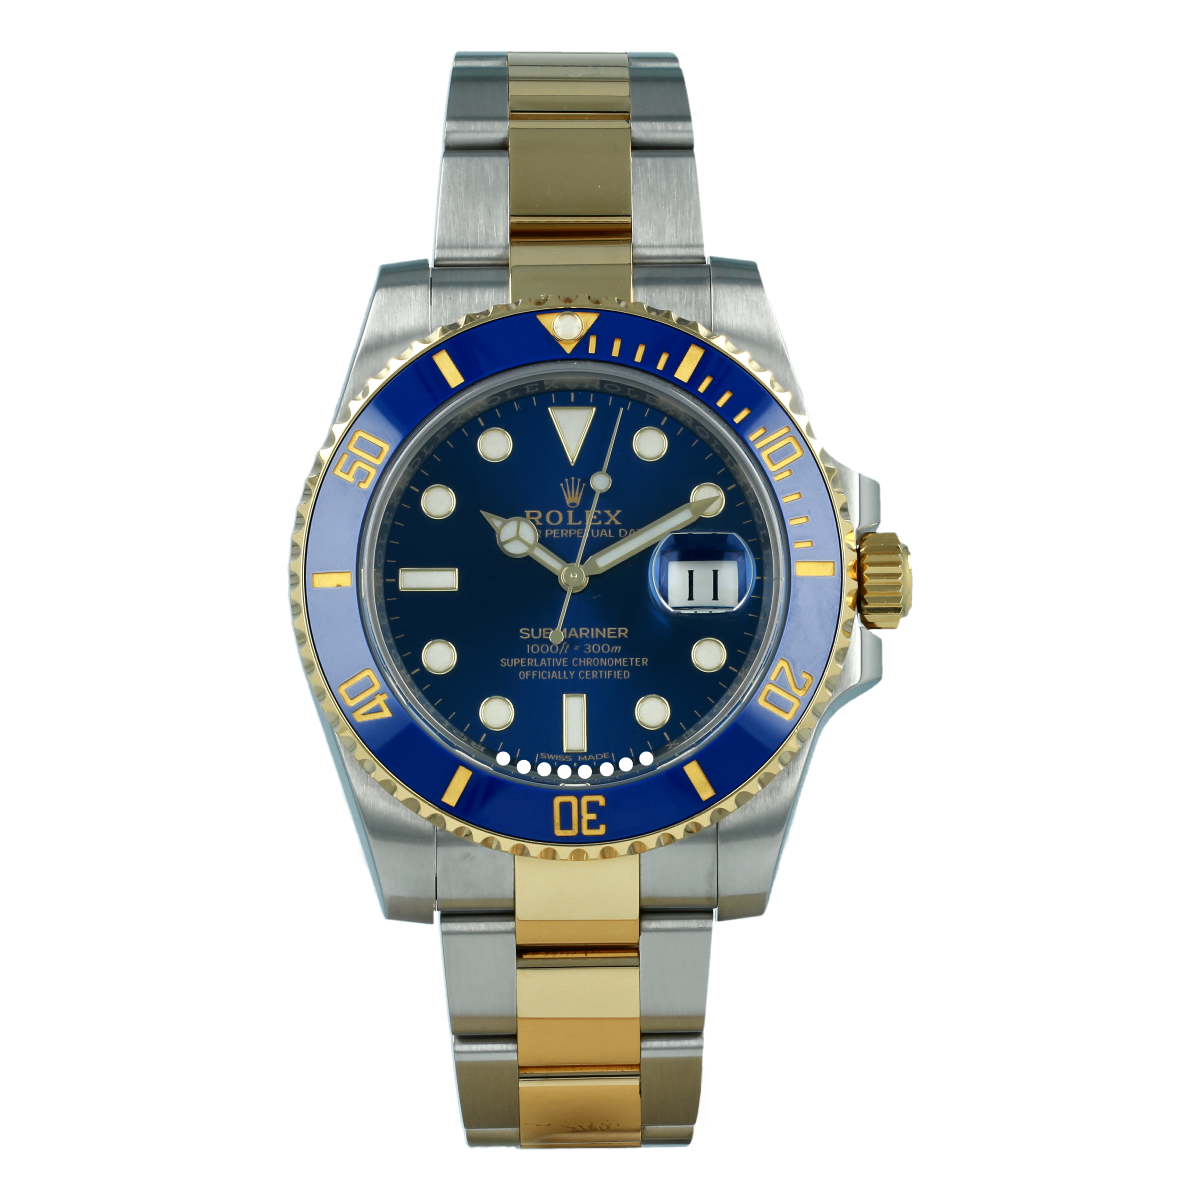 Rolex Submariner Date 116613LB Steel and Yellow Gold | Buy pre-owned Rolex watch